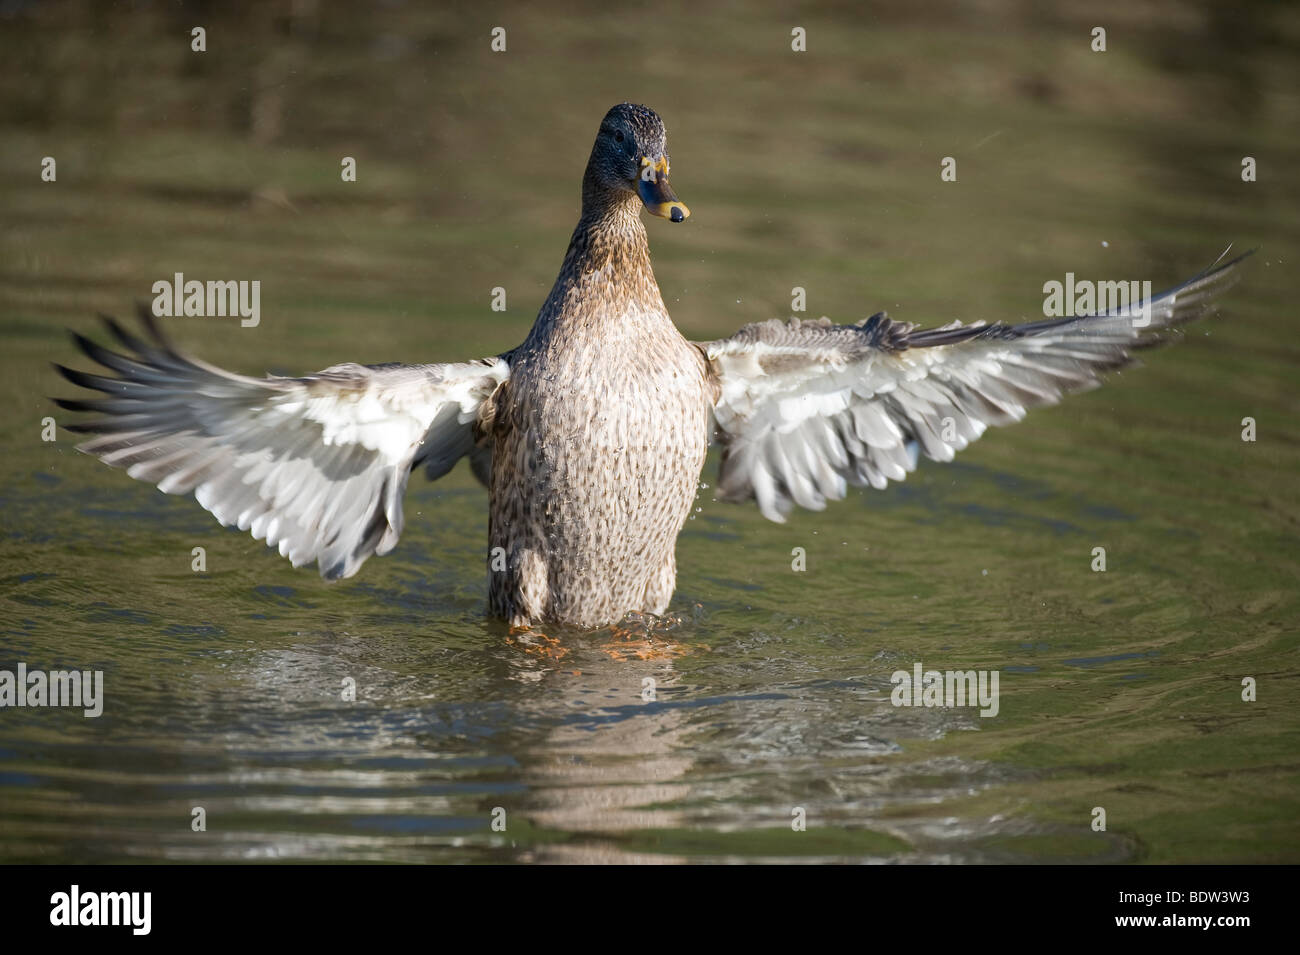 A duck beating its wings Stock Photo